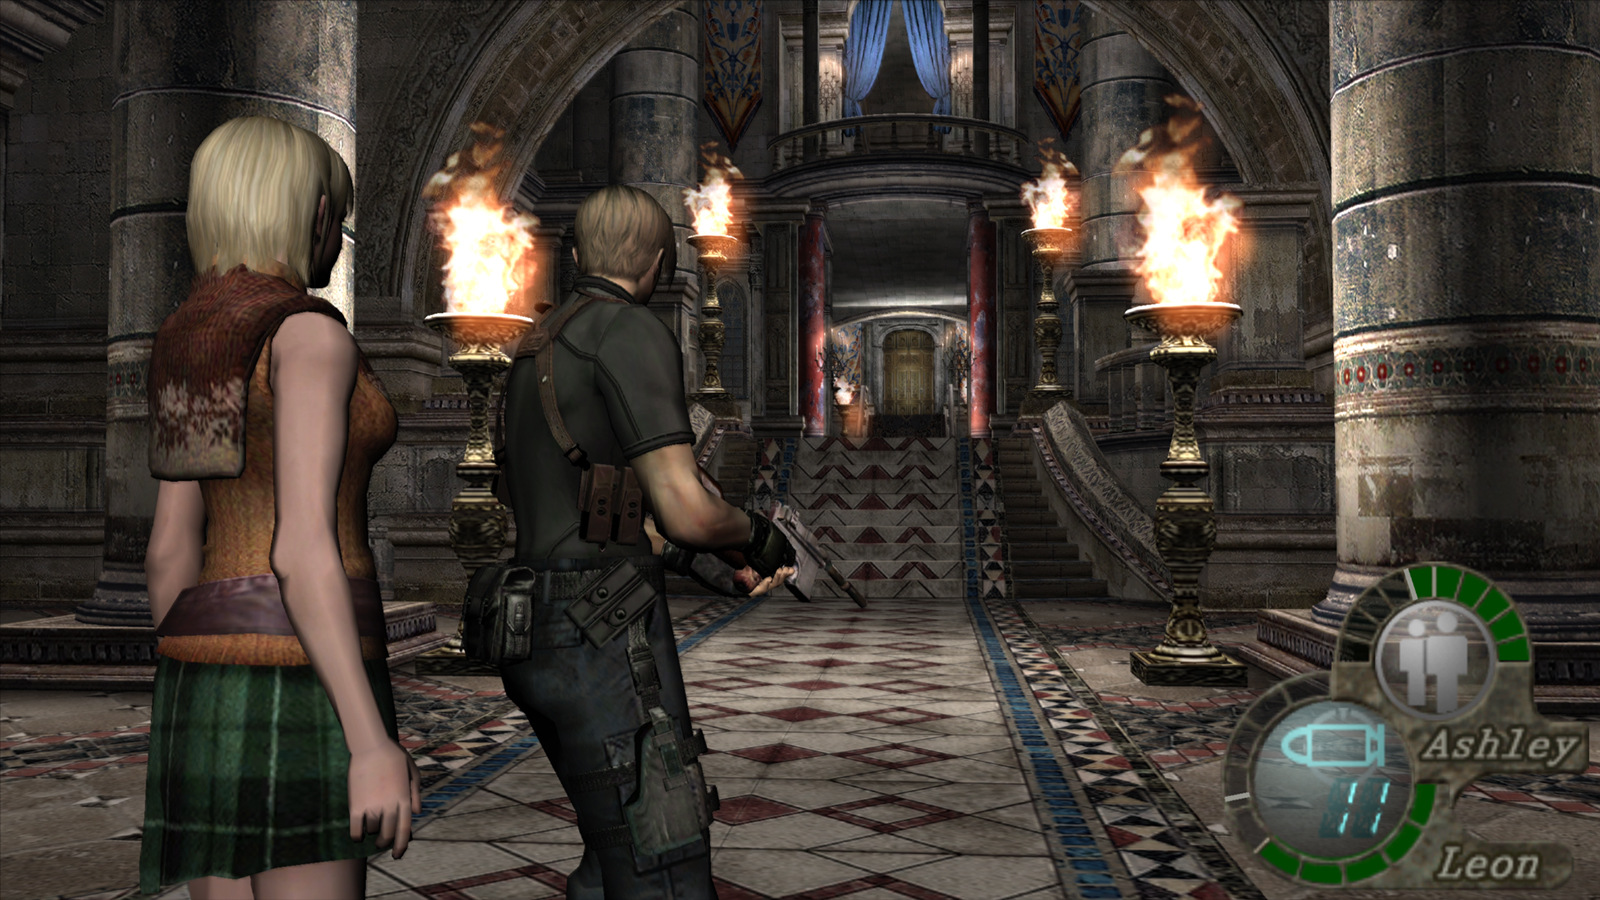 Download resident evil 4 hd edition